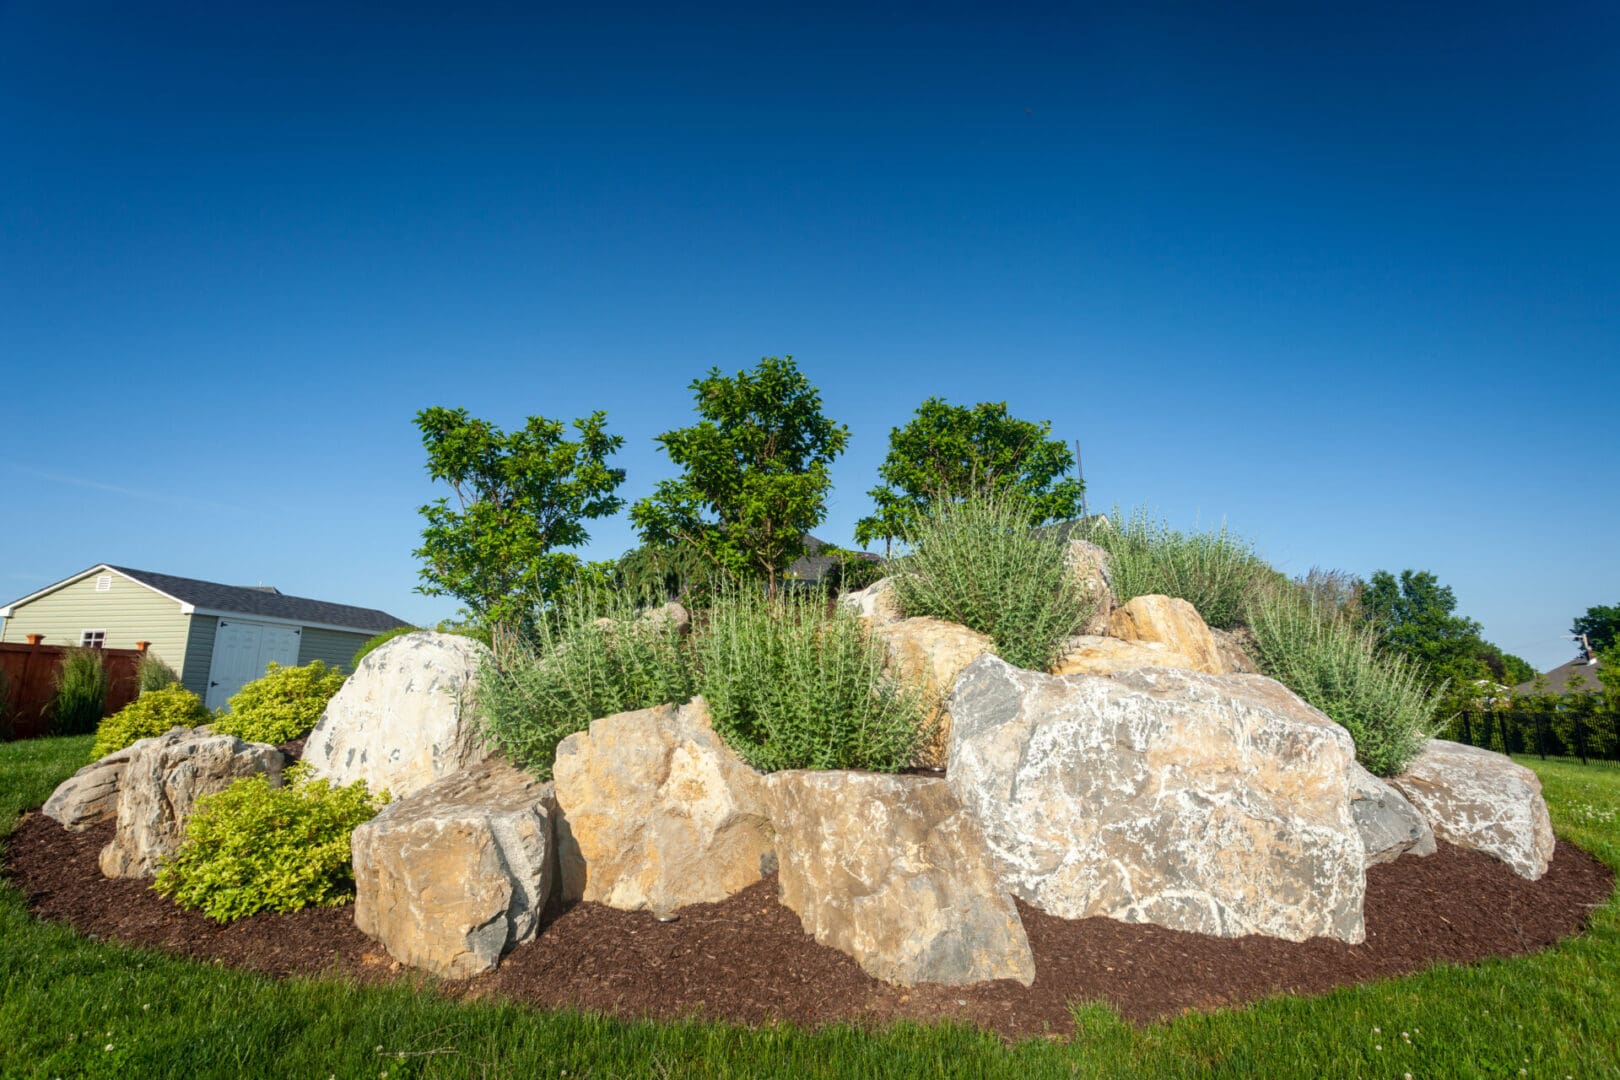 A boulder rock garden with grass and shrubs in front of a house.